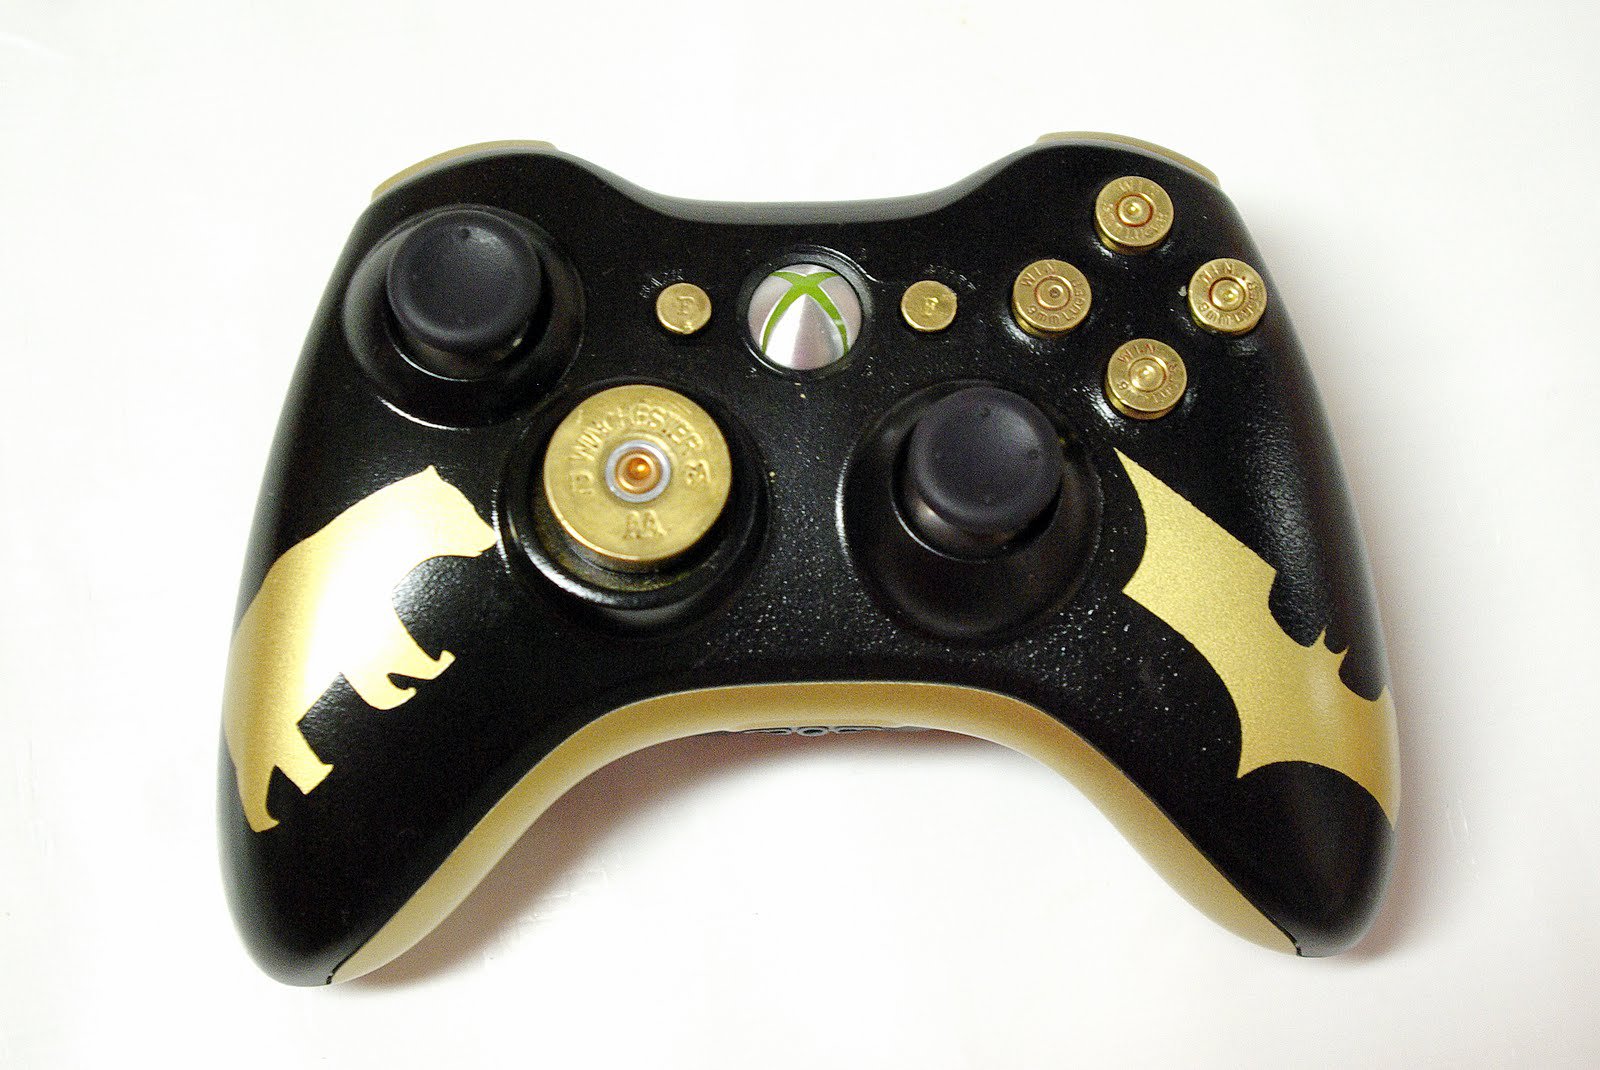 Moar of the manliest controller ever made.